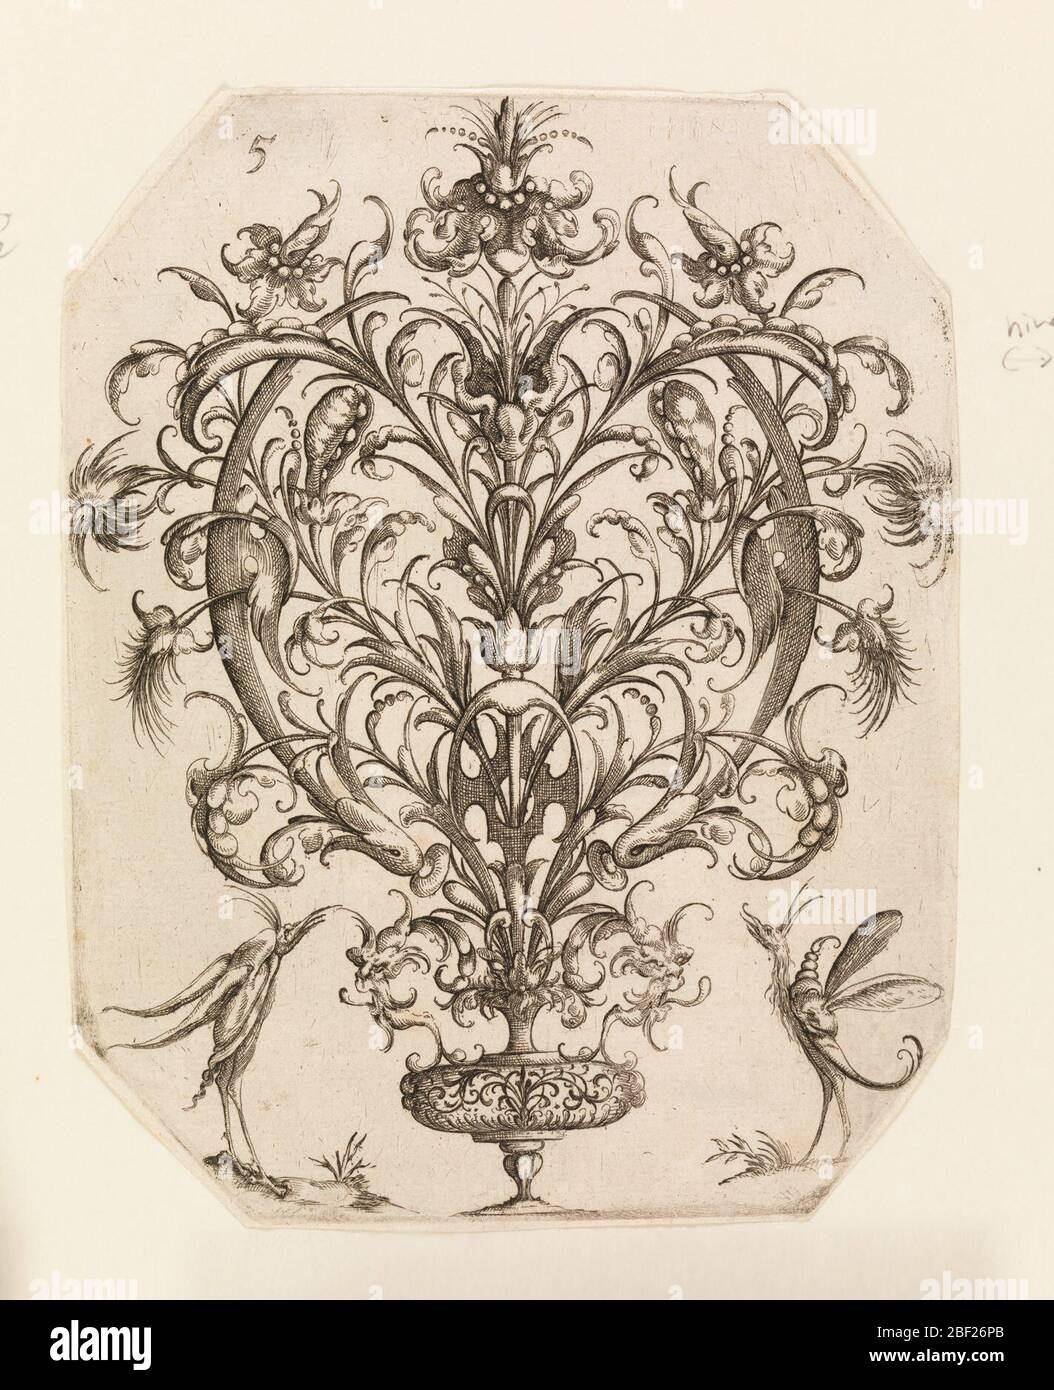 Plate 5 from Die Folge der phantastischen Schmuckstre Suite of Fantastic Ornamental Bouquets. Two grotesque birds flank the vase from which the nosegay rises. Stock Photo